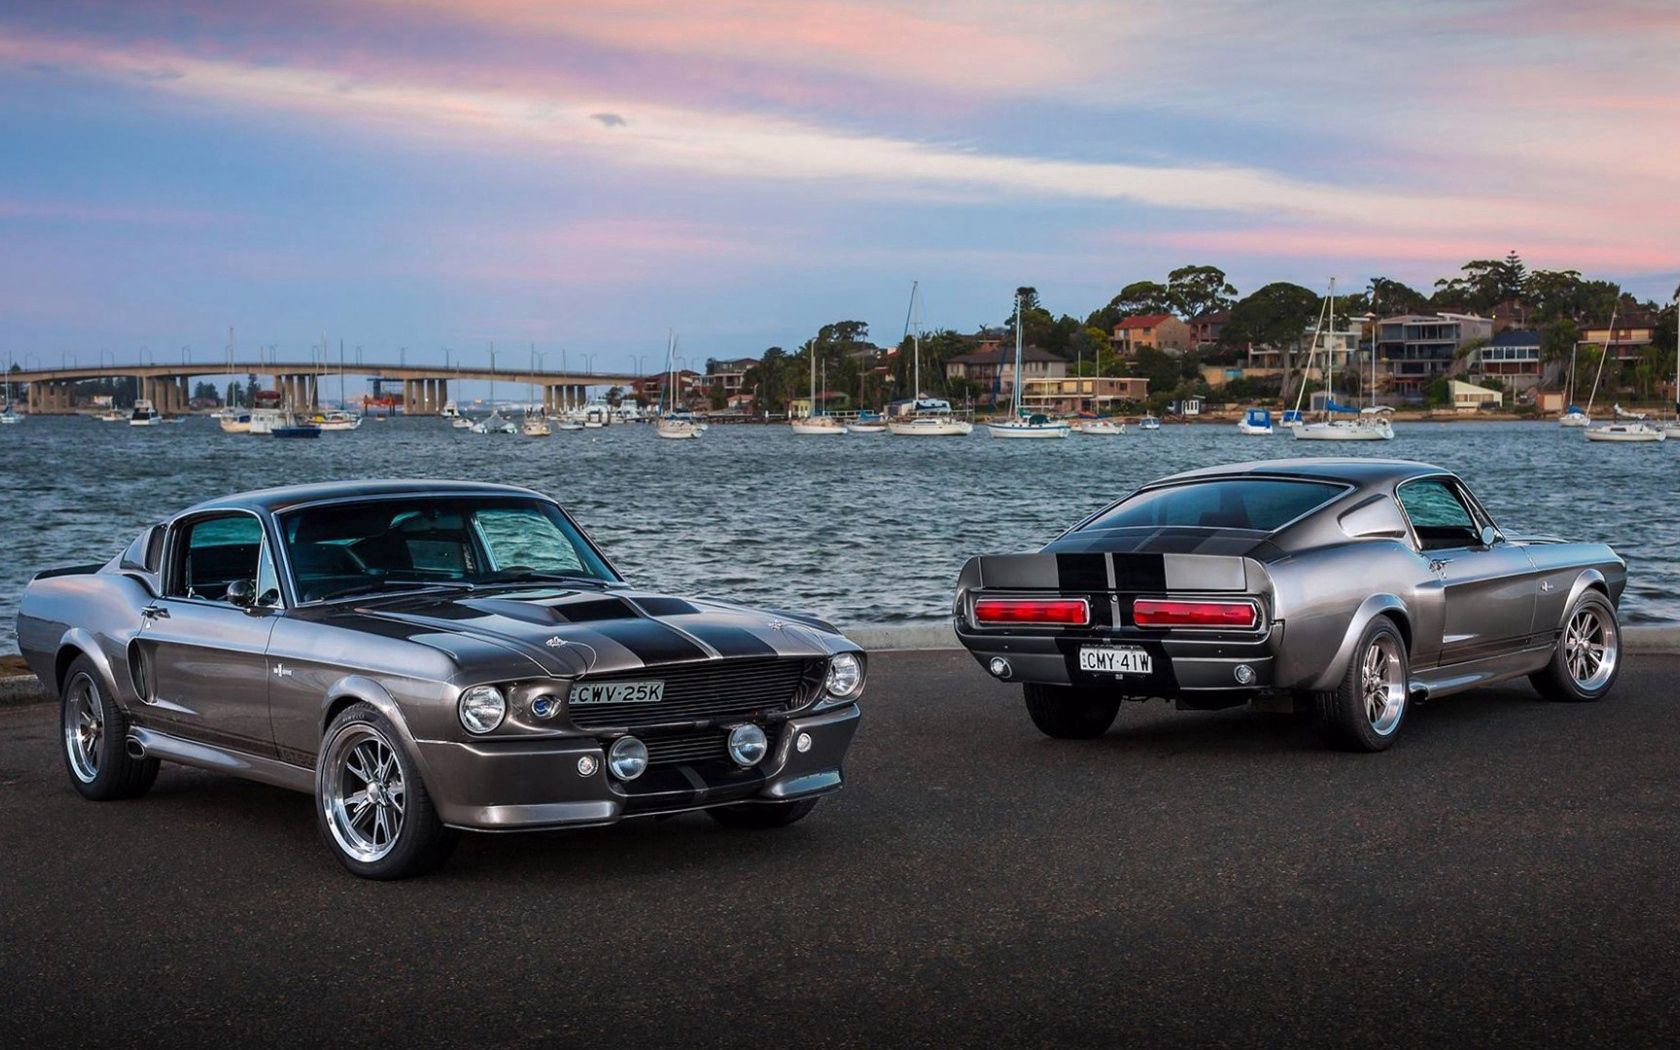 ford, sea, mustang, cars, silver, silvery